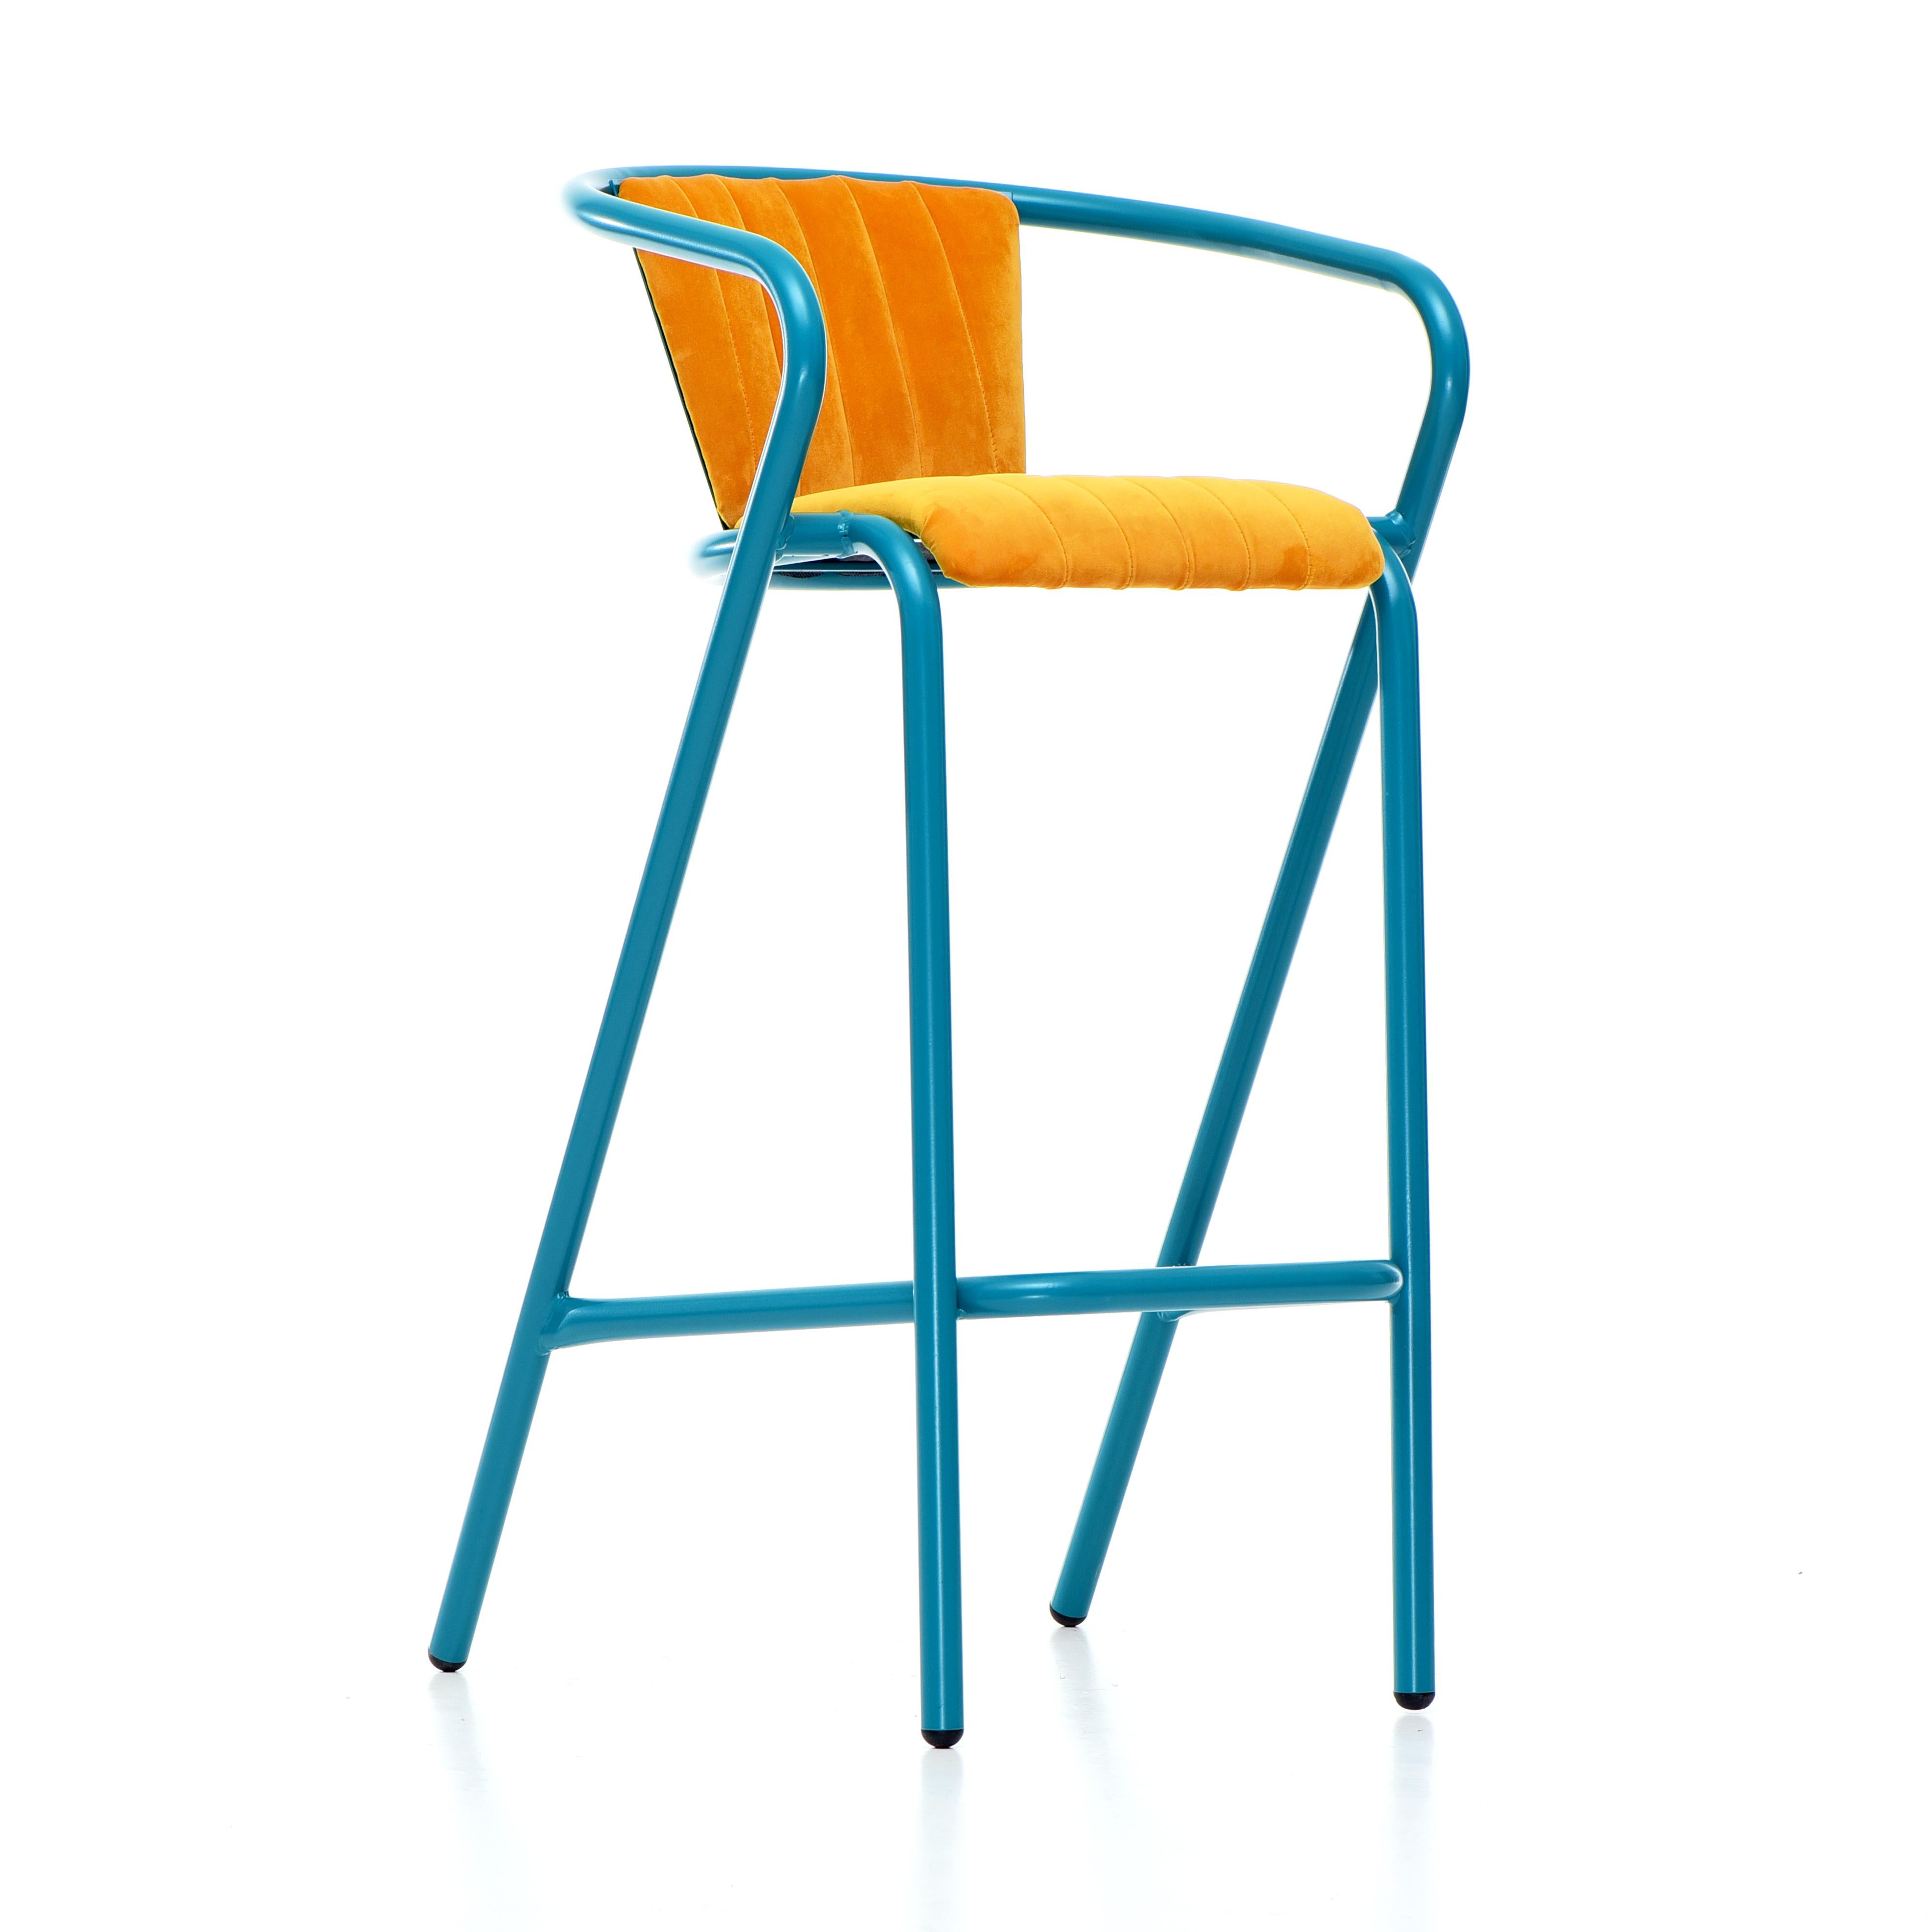 BICAstool is a stackable steel High Stool Chair made from recycled and recyclable steel, finished with our premium selection of powder-coating colors, in this case in rich blue color, that transforms a Classic in something new and vibrant. The